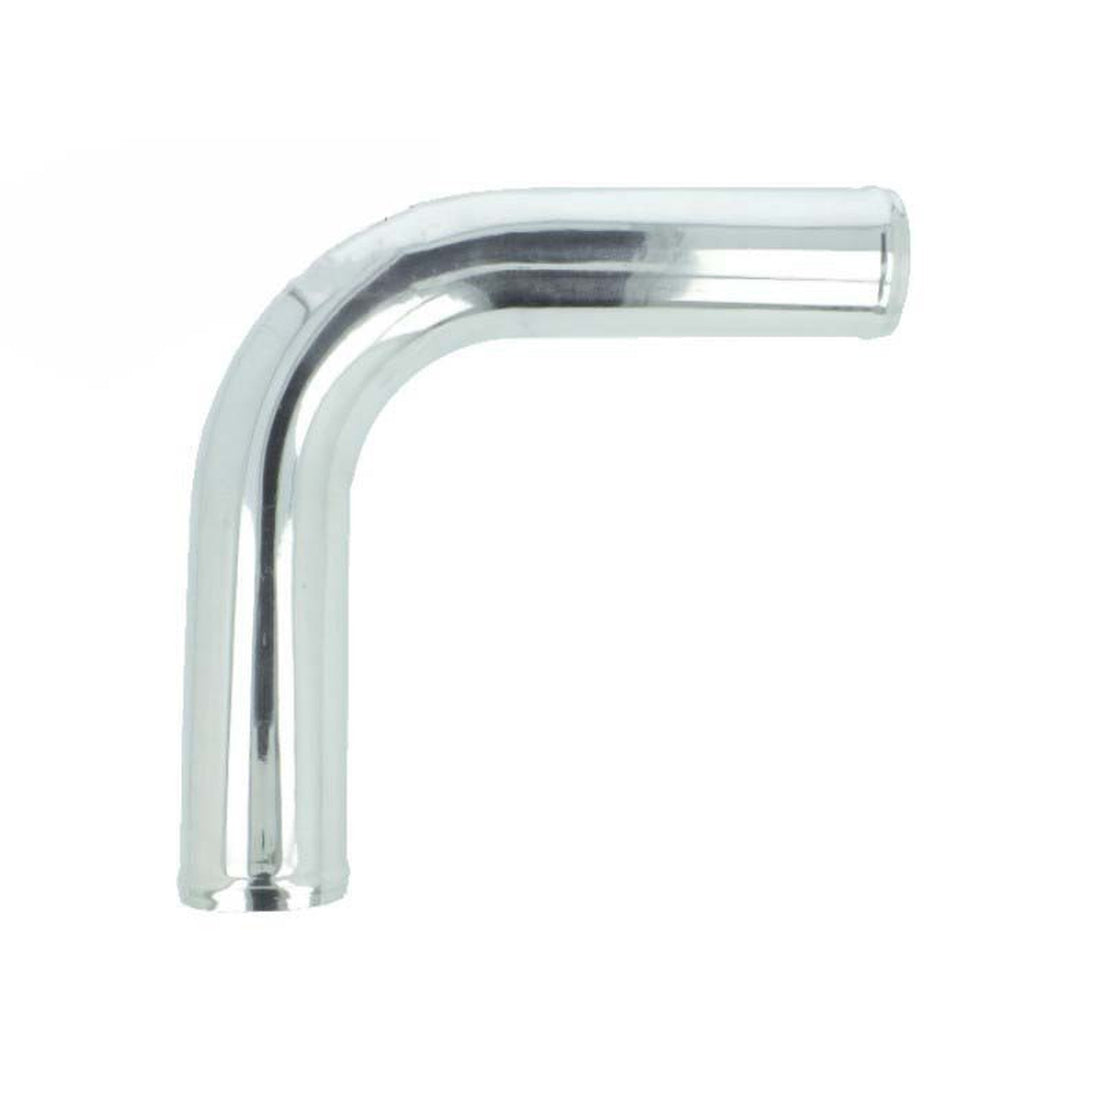 BOOST Products Aluminum Elbow 90 Degrees with 3" OD, Mandrel Bent, Polished